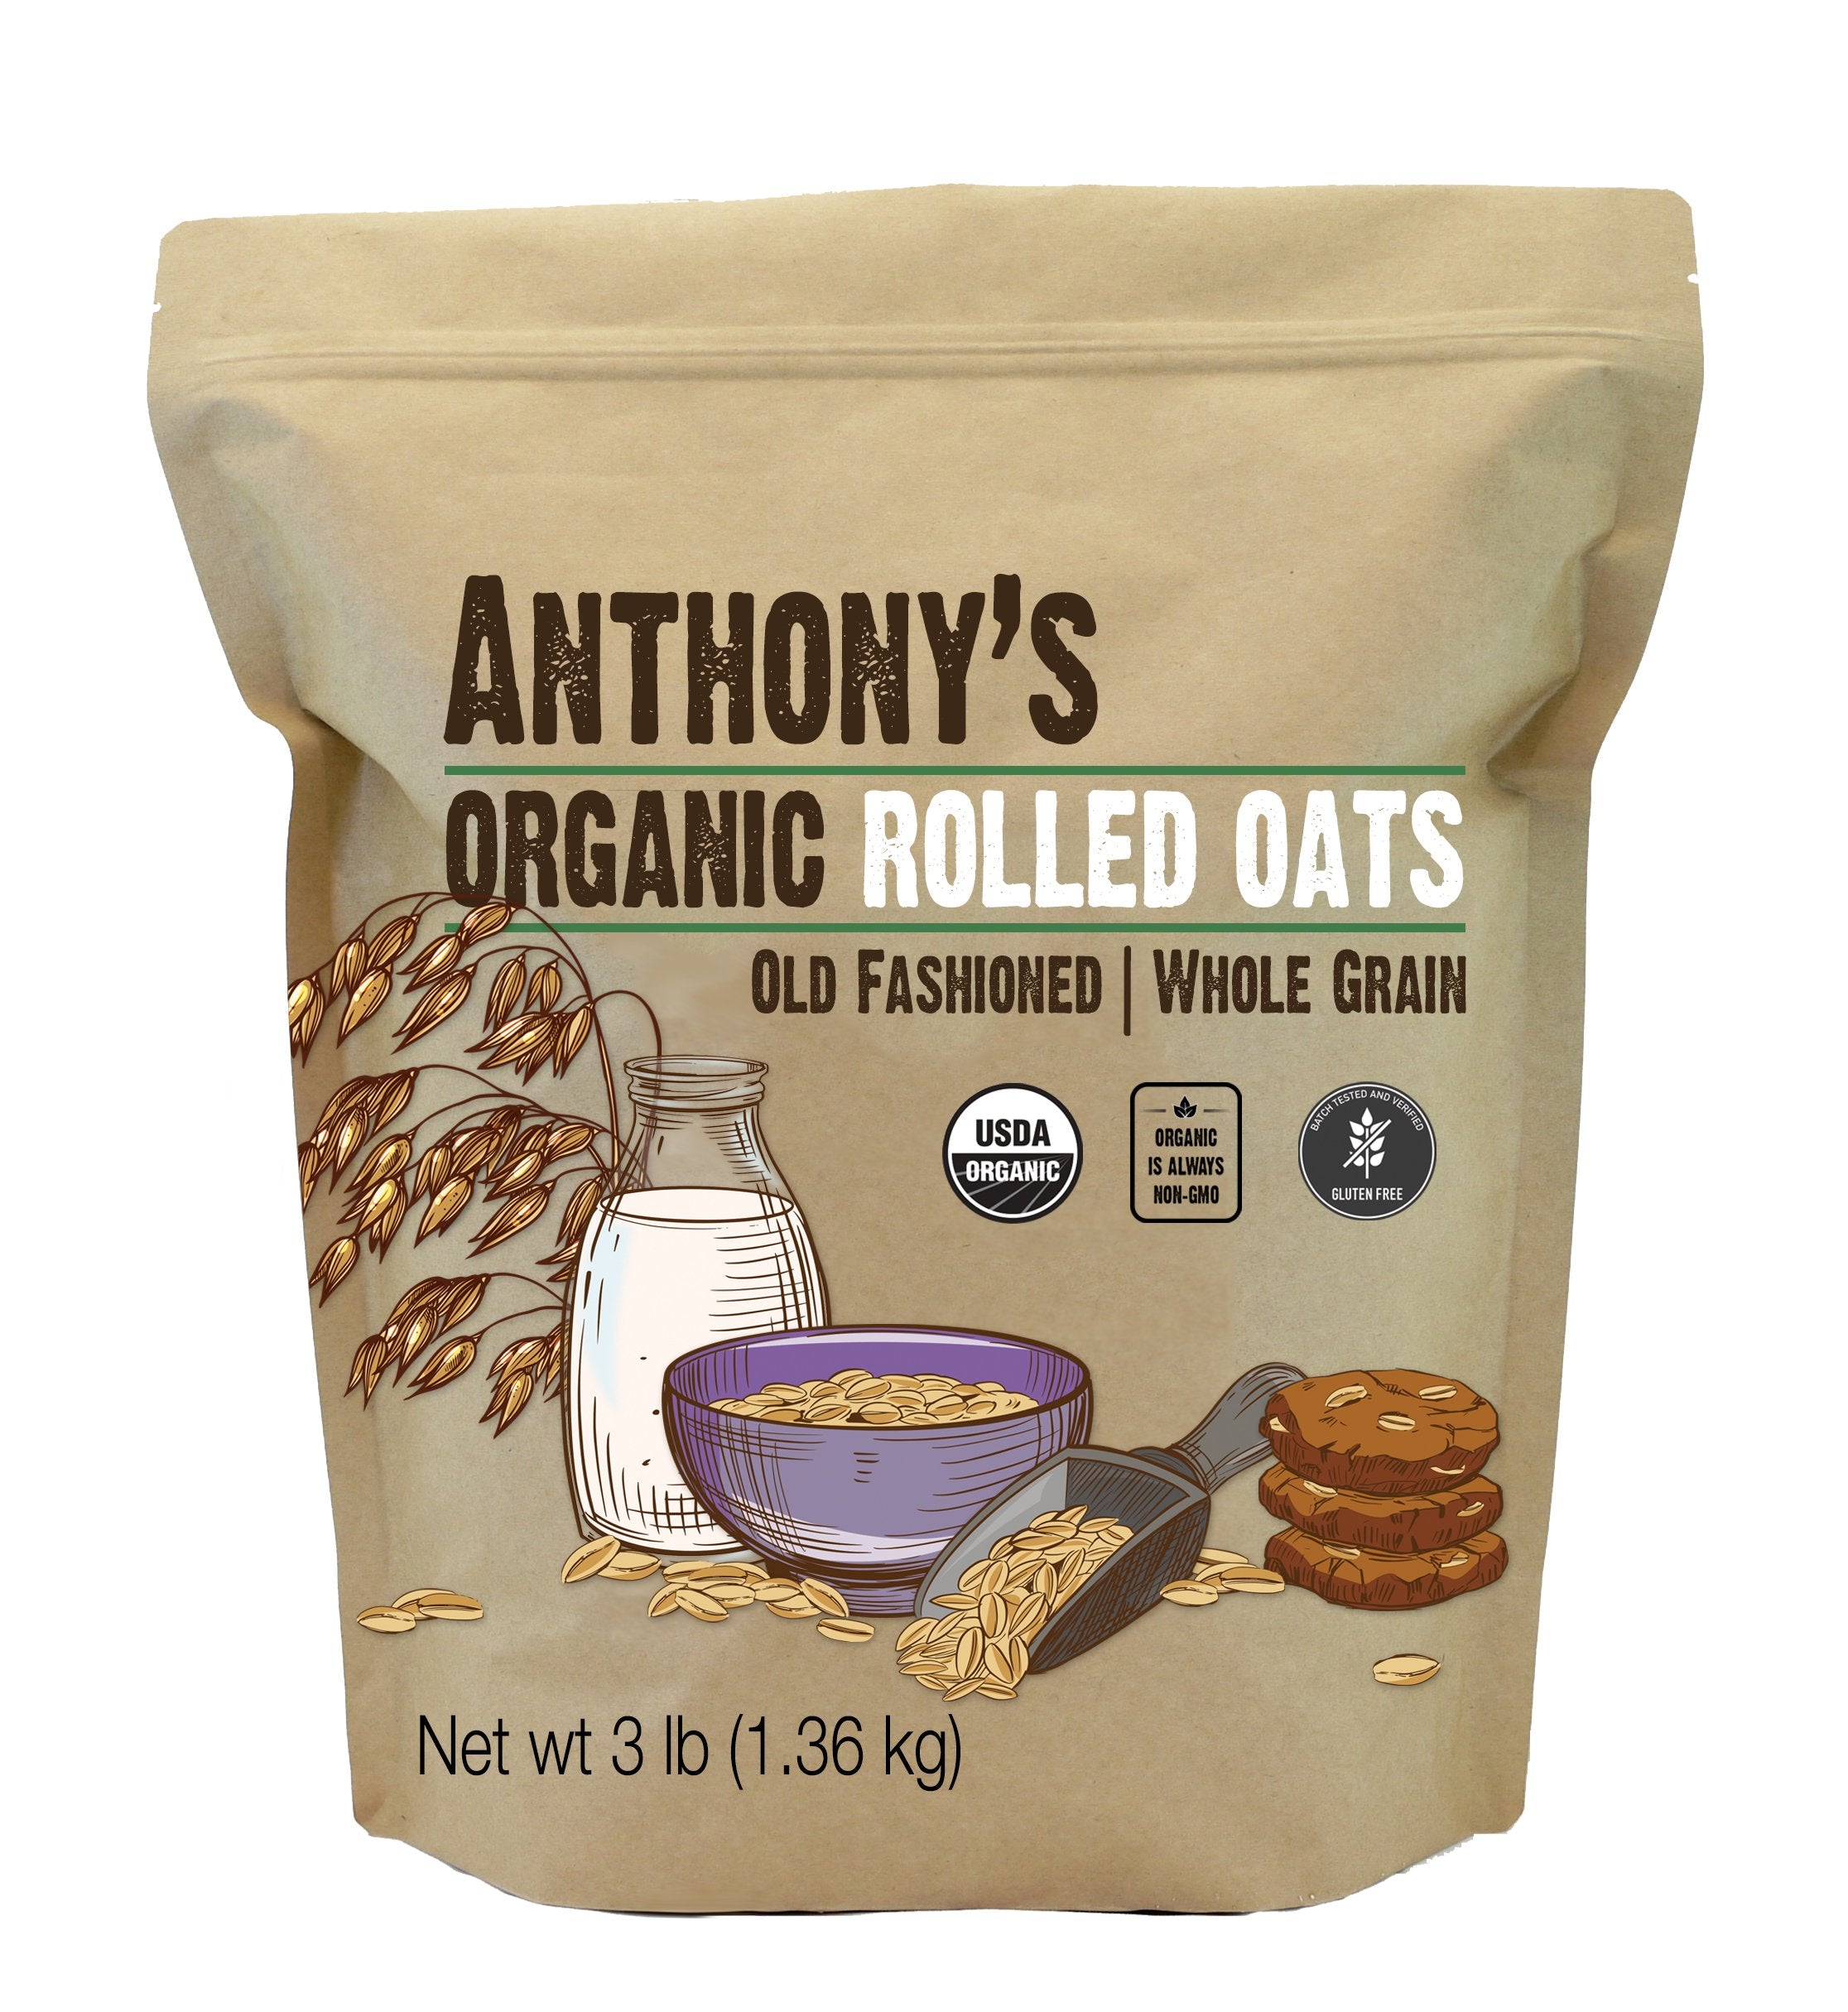 Old-Fashioned Rolled Oats - Ashery Country Store